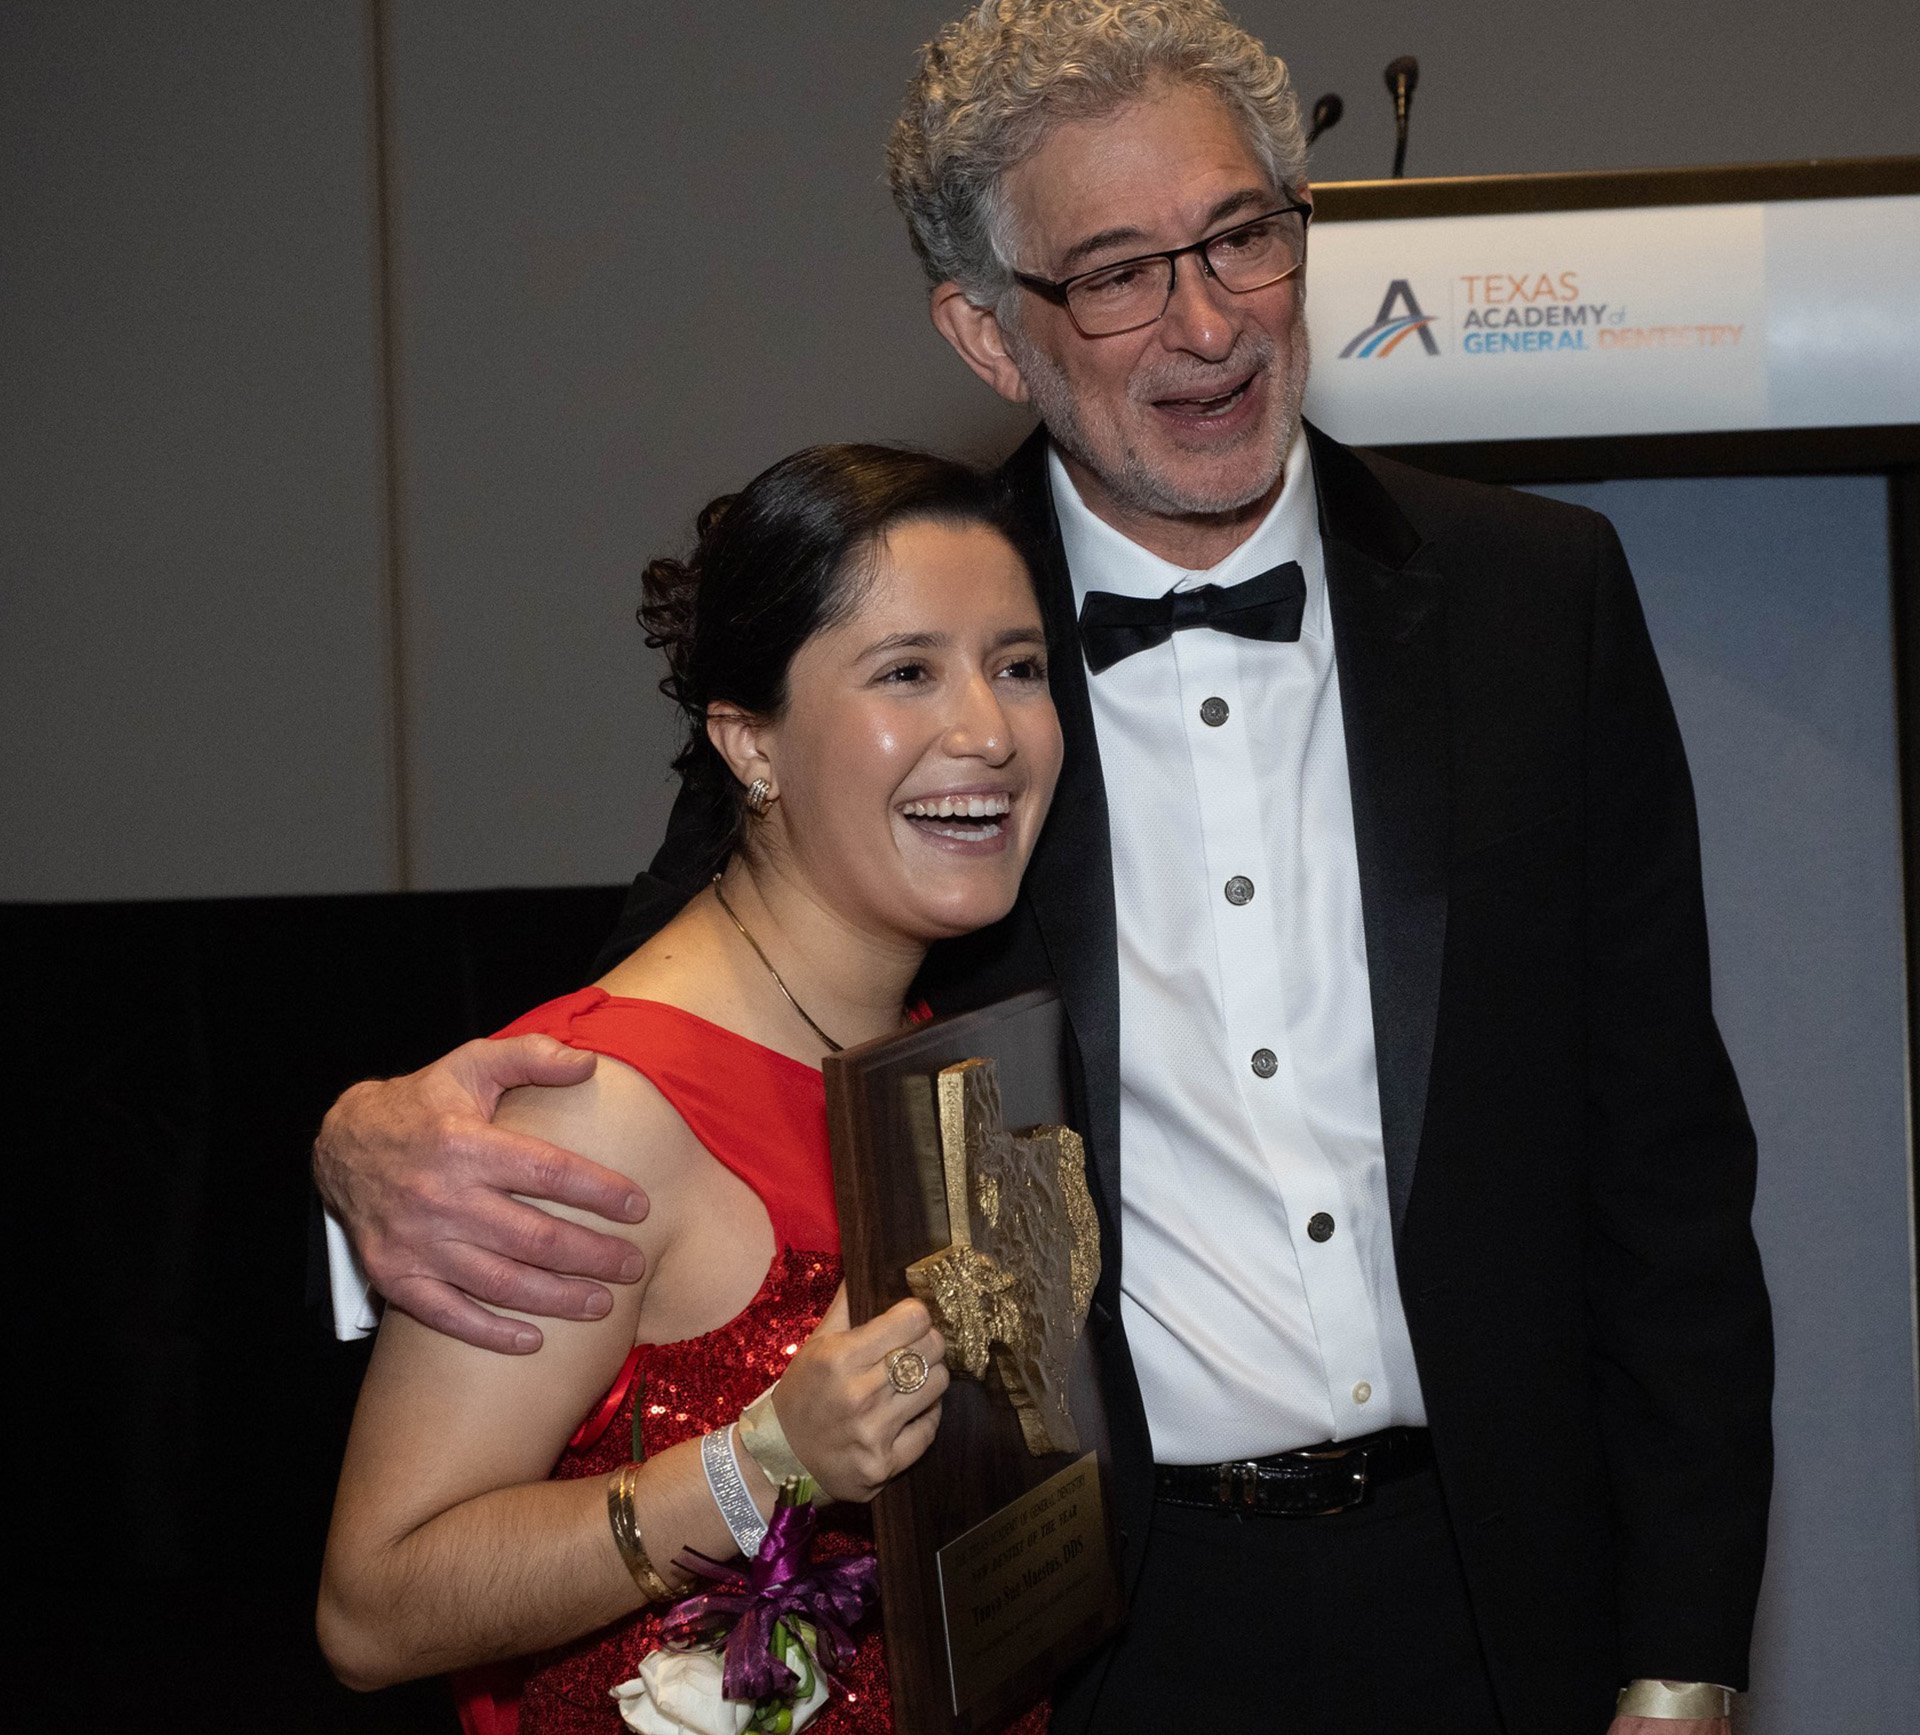 UTHealth Houston School of Dentistry alumna Tanya Sue Maestas, DDS ’18, was recognized as the 2023 Texas New Dentist of the Year at the Texas Academy Awards.